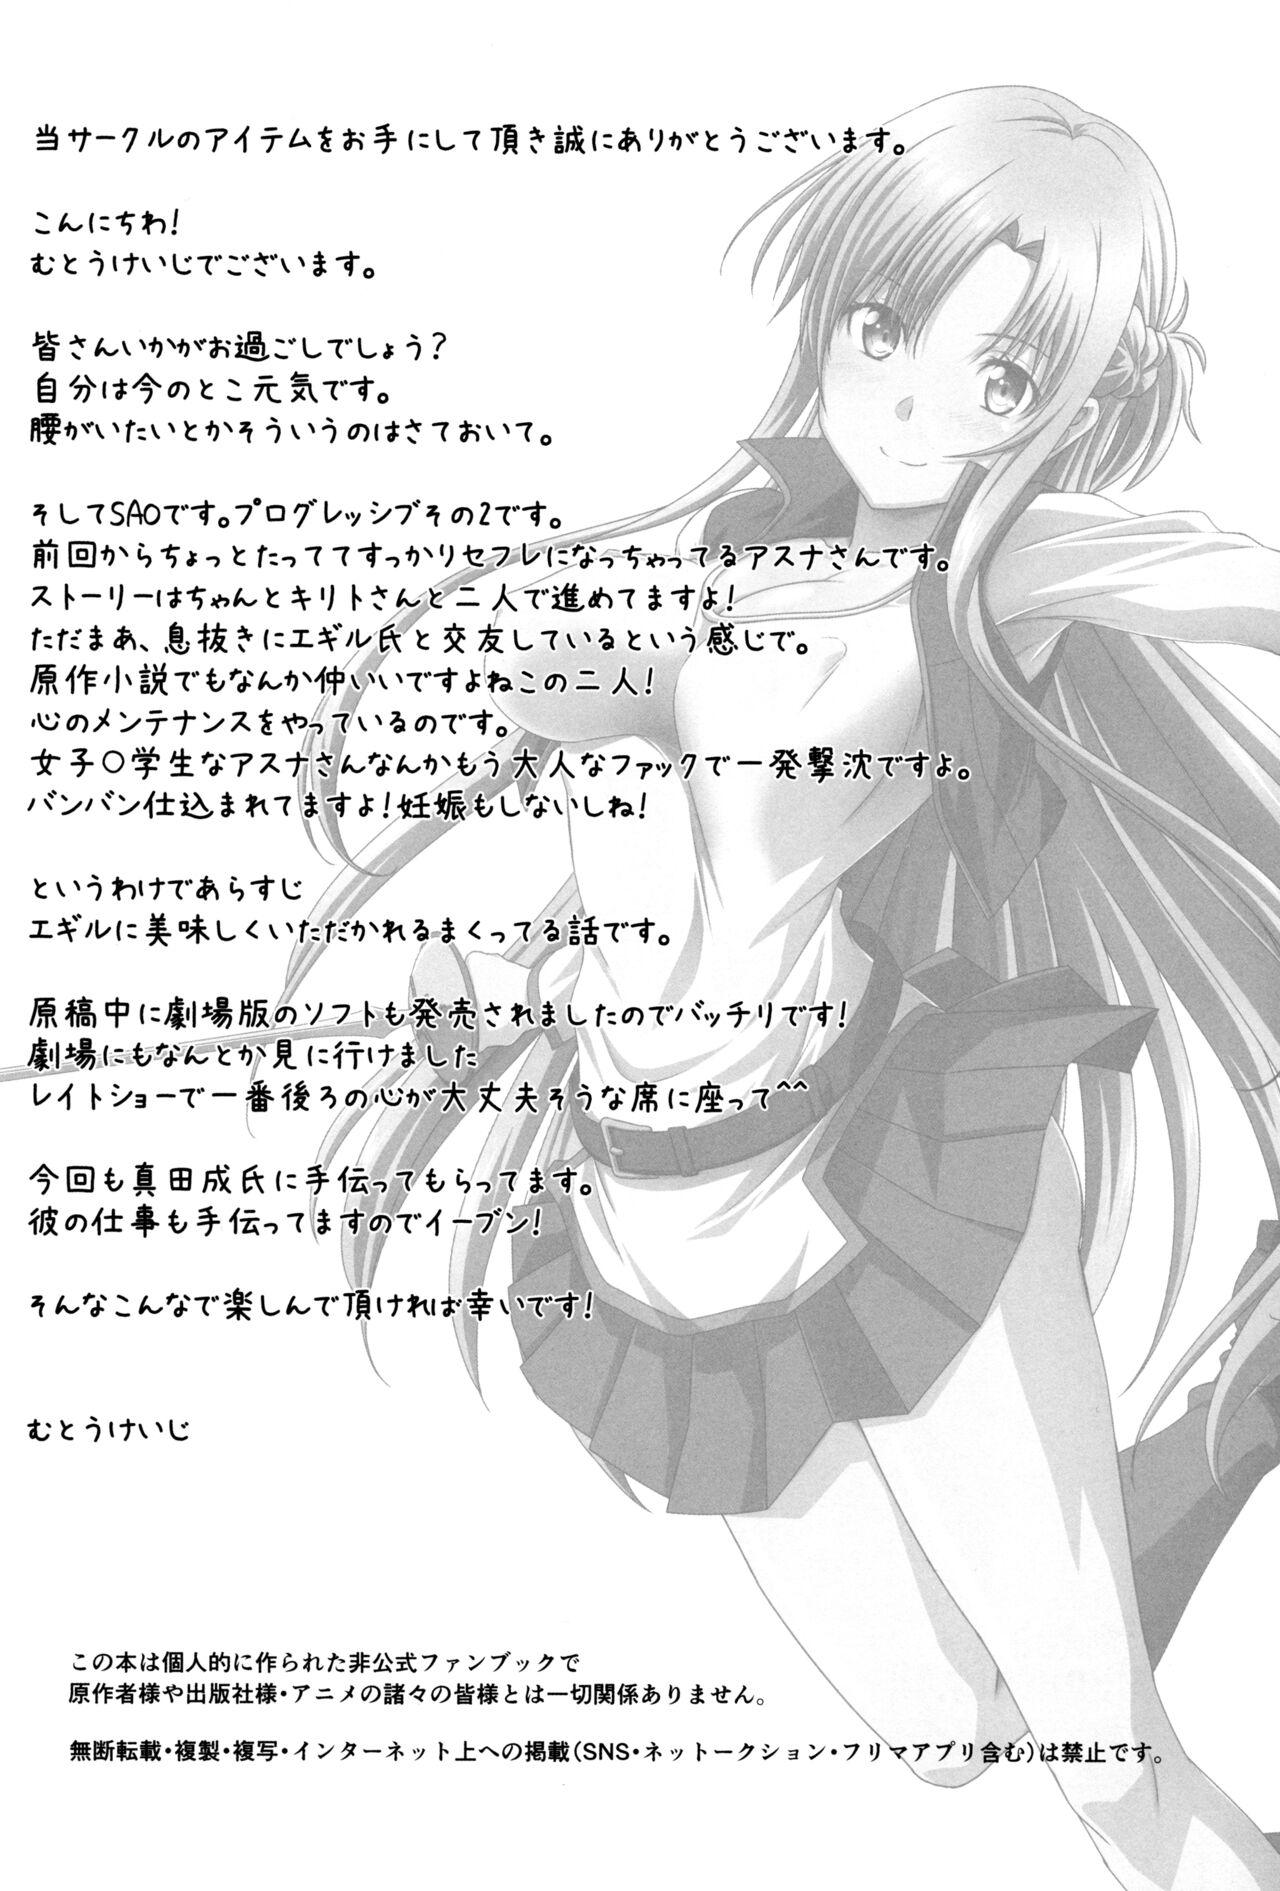 Pussy Play Astral Bout Ver. 45 - Sword art online Amazing - Page 3